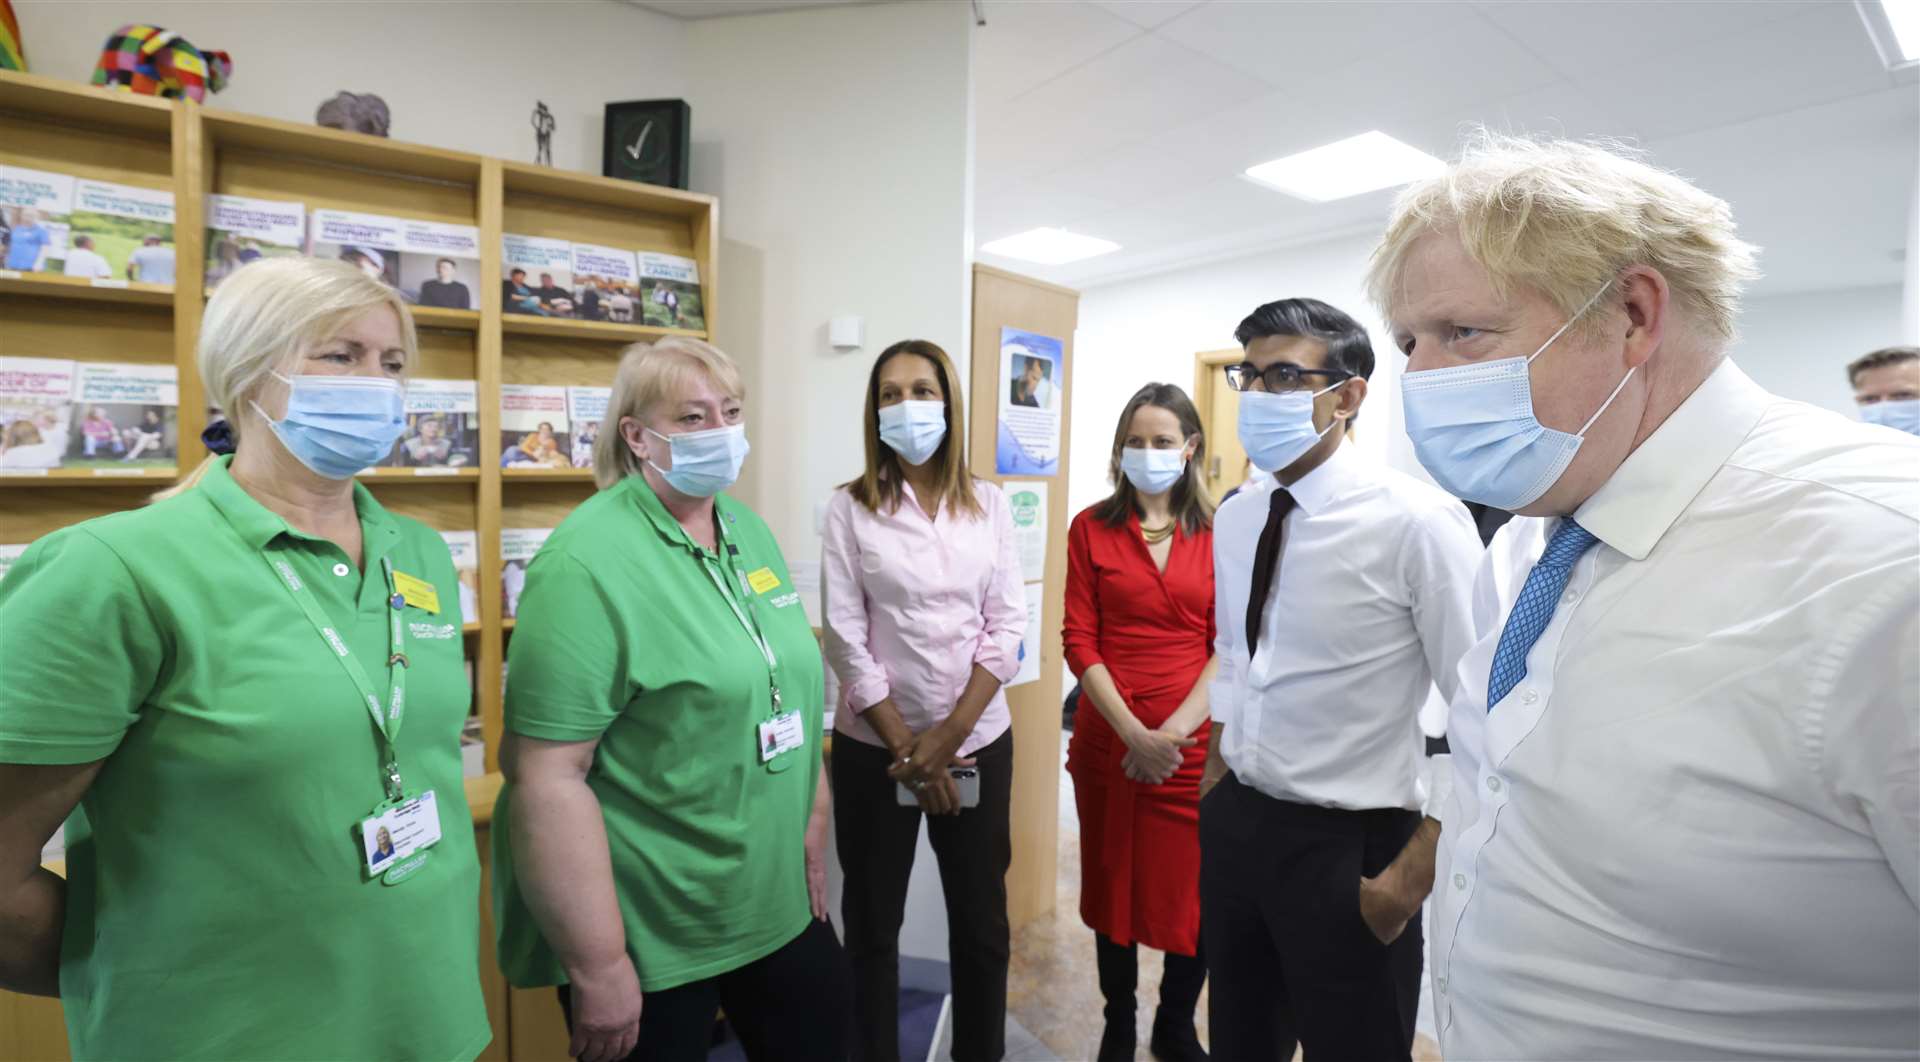 The Prime Minister visited staff at the Kent Oncology Centre in Maidstone earlier this year. Picture by Andrew Parsons / No 10 Downing Street